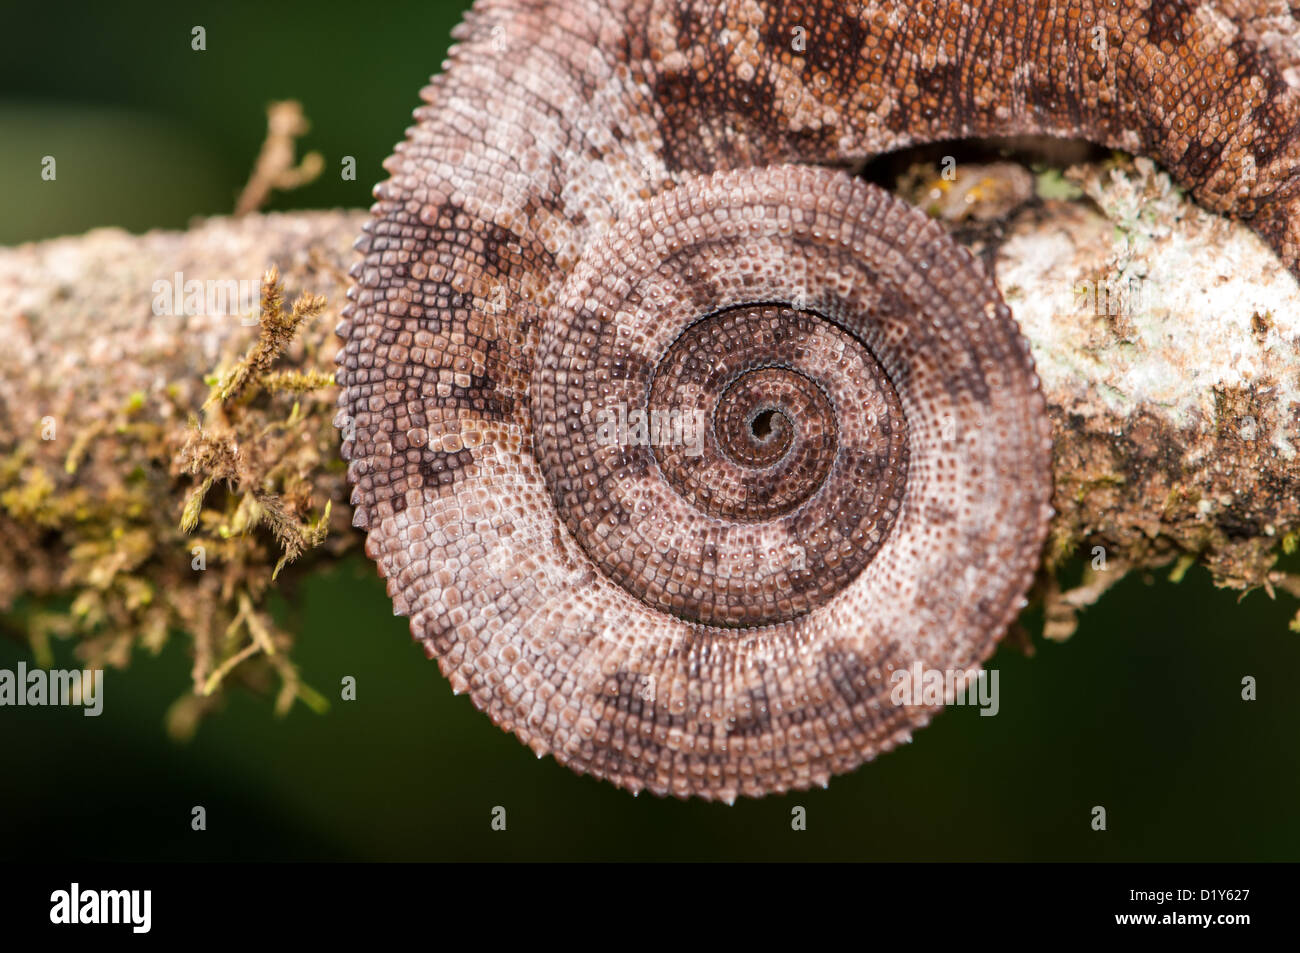 curled tail of a wild chameleon on a tree branch with moss Stock Photo